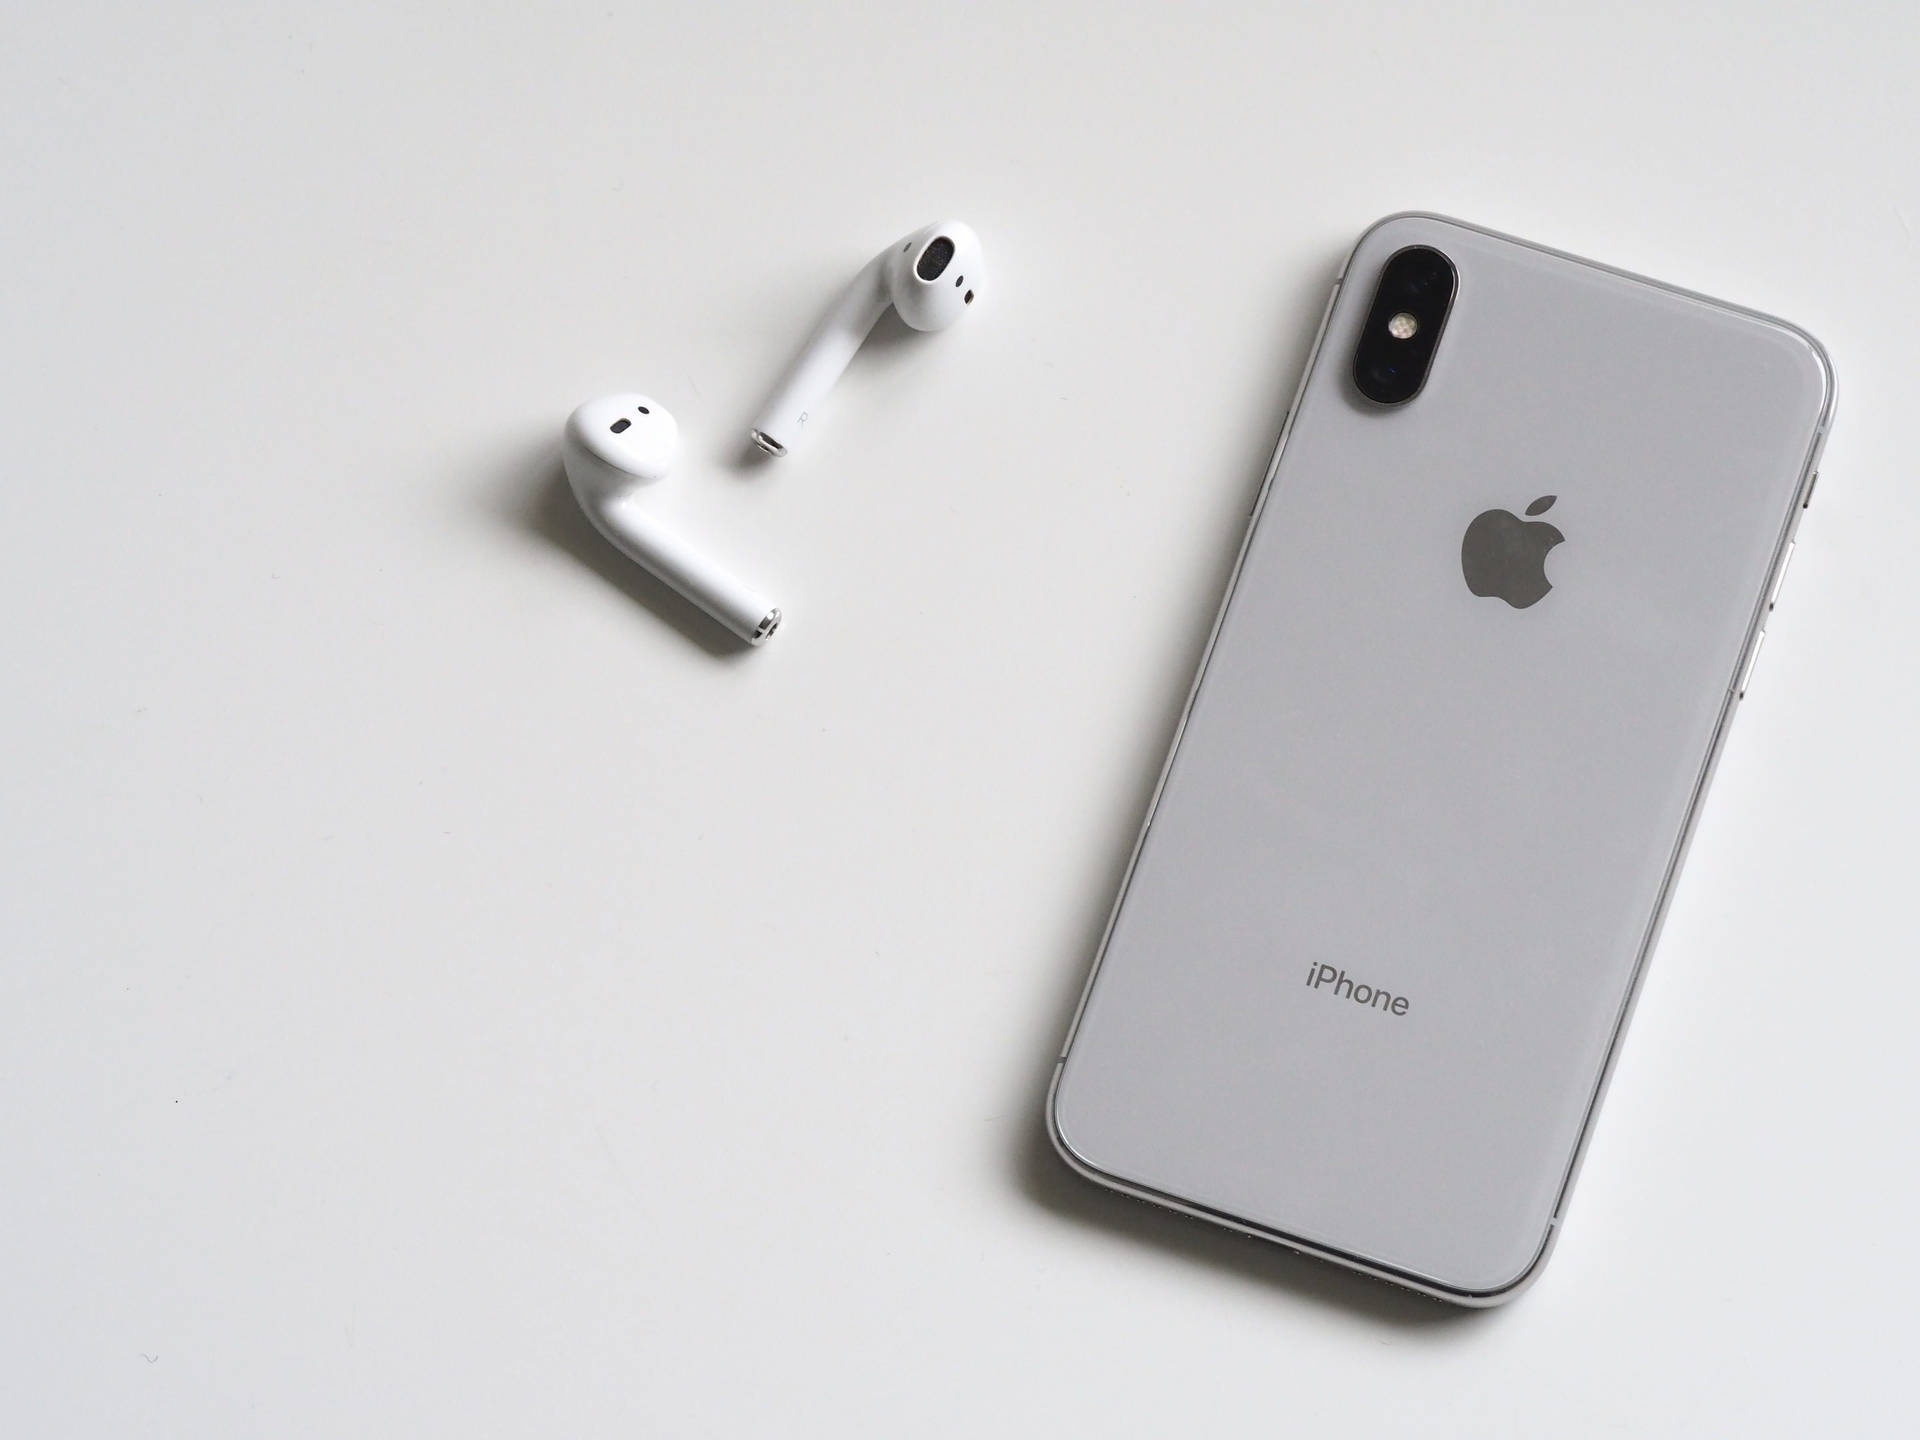 Airpods With Iphone X Background